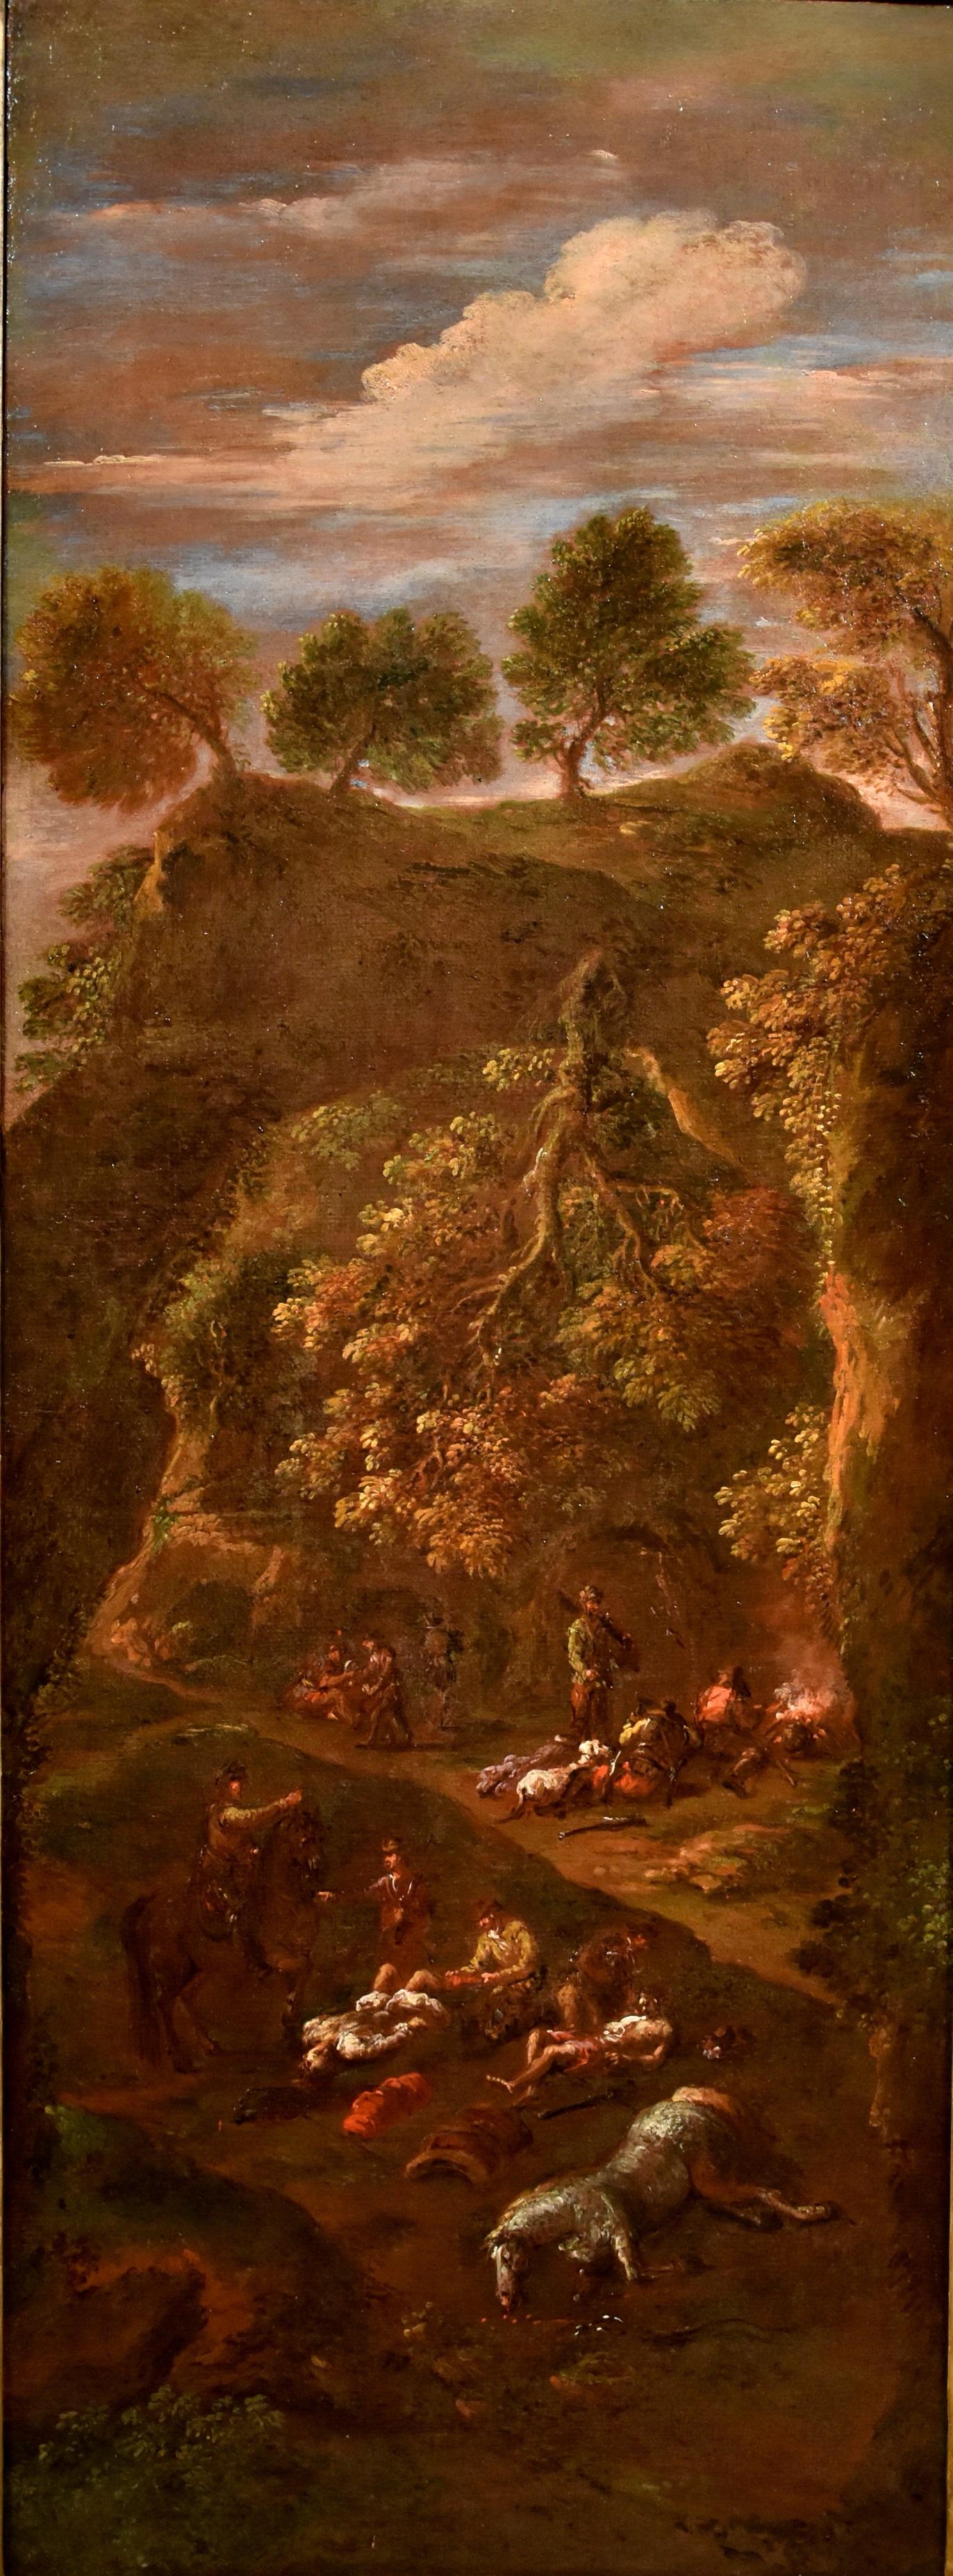 Zais Landscape Couple Paint Oil on canvas Old master 18th Century Italy Venice For Sale 1